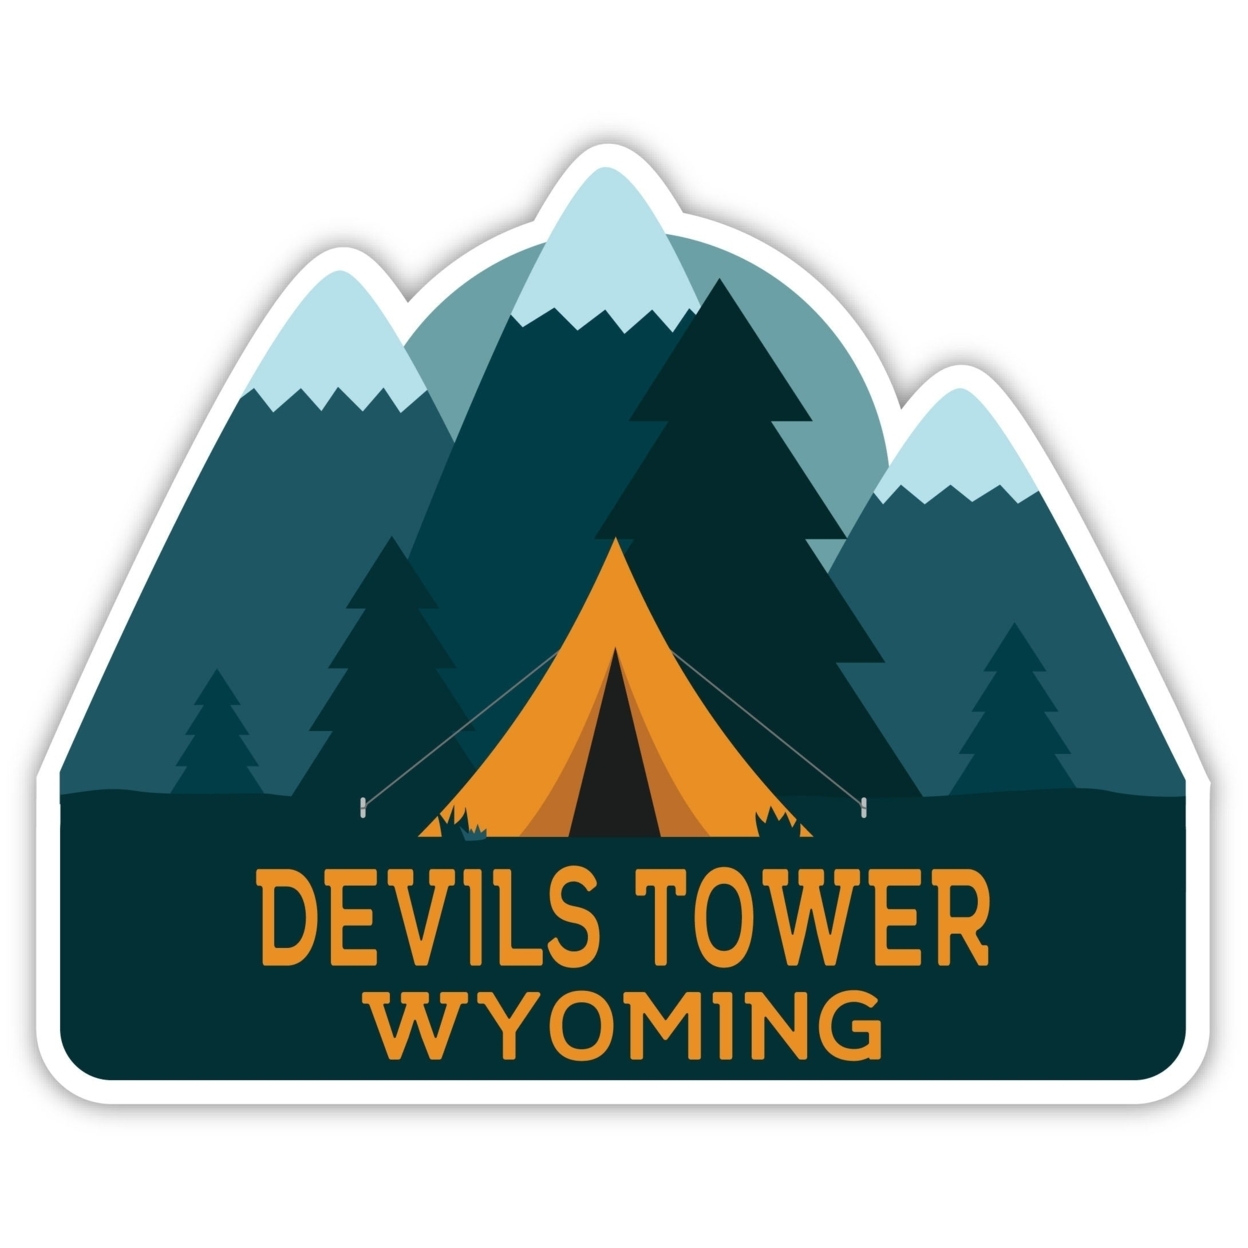 Devils Tower Wyoming Souvenir Decorative Stickers (Choose Theme And Size) - Single Unit, 8-Inch, Bear